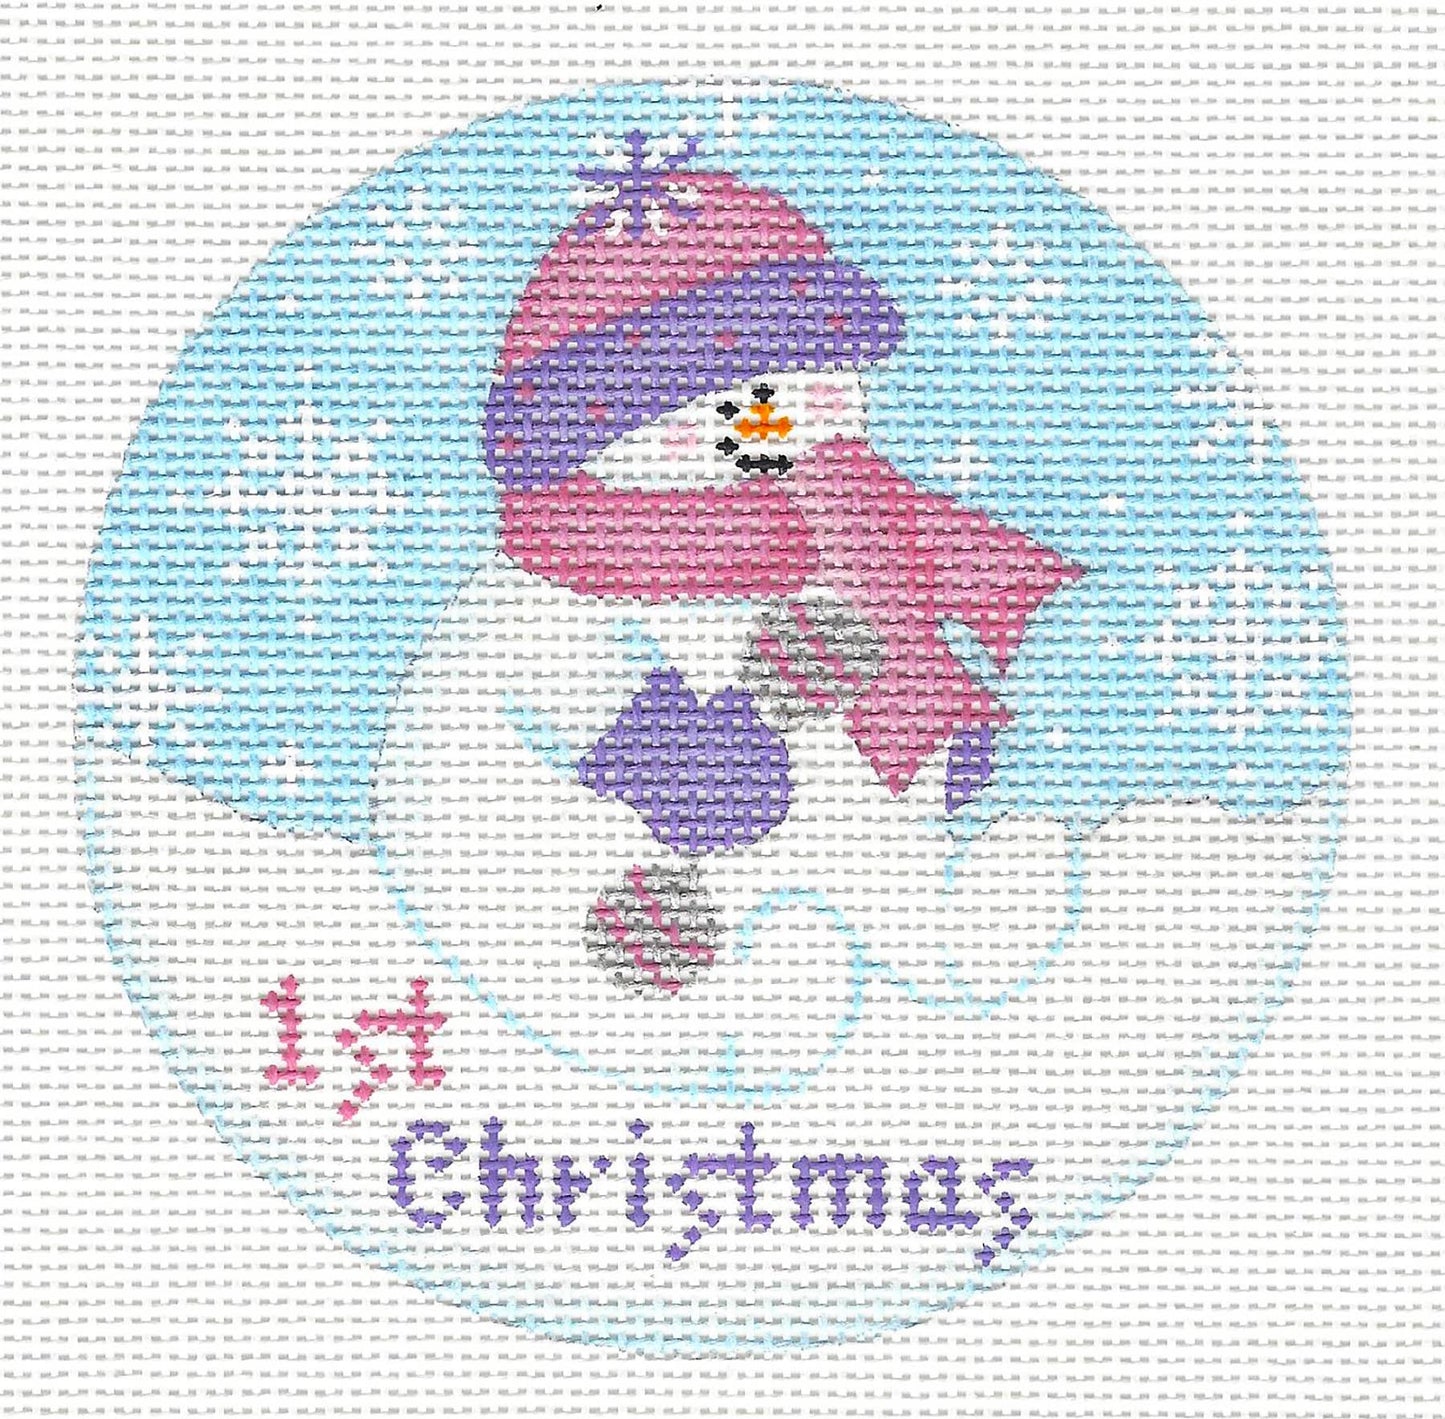 Baby Round ~ Baby Snowgirl's 1st Christmas 18 Mesh handpainted 4" Rd. Needlepoint Canvas by Pepperberry